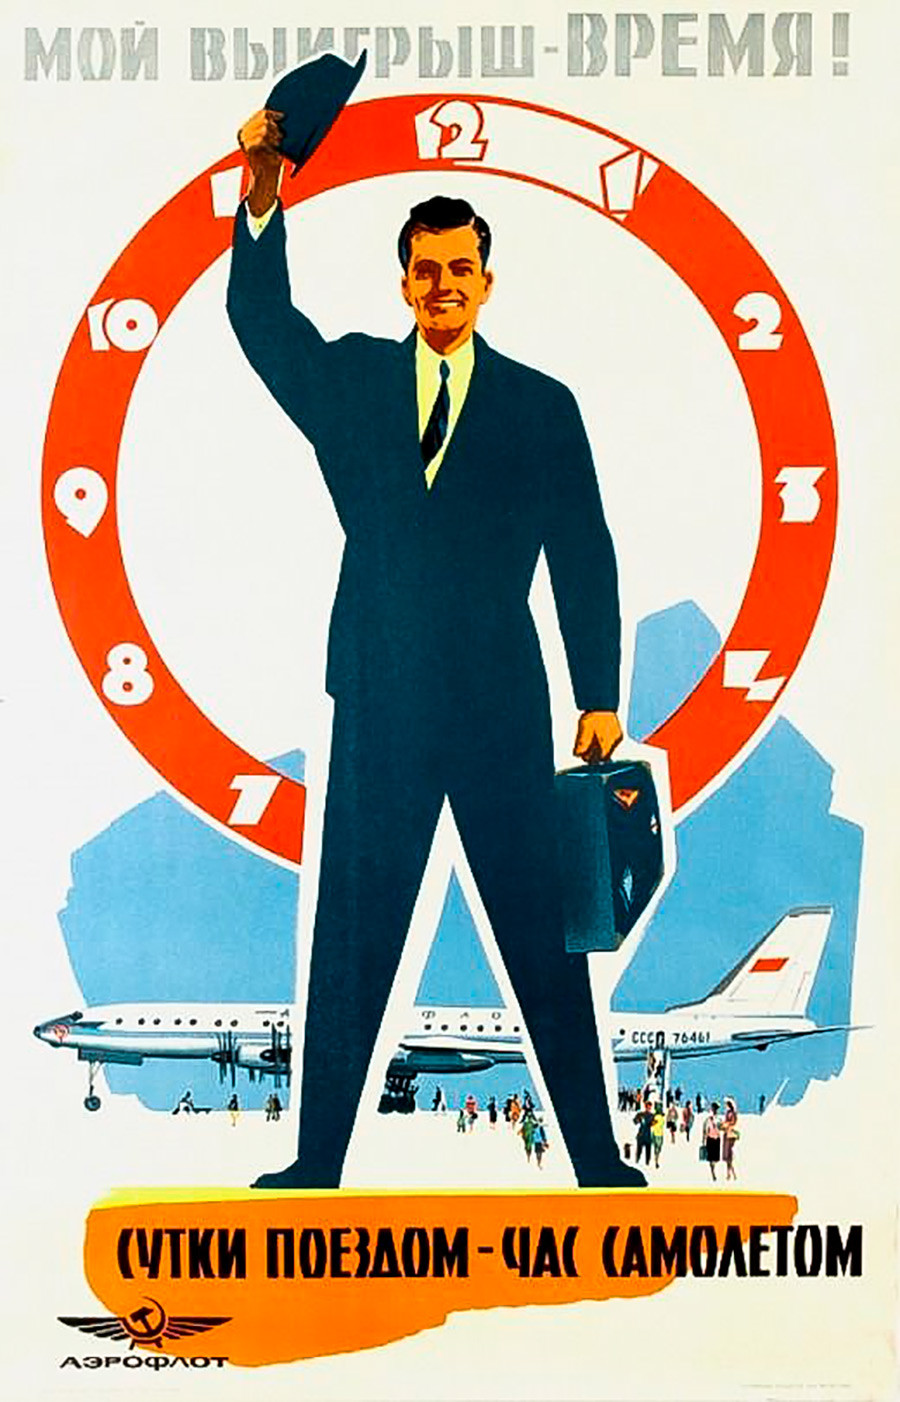 'My profit is time: One day by train, One hour by plane'